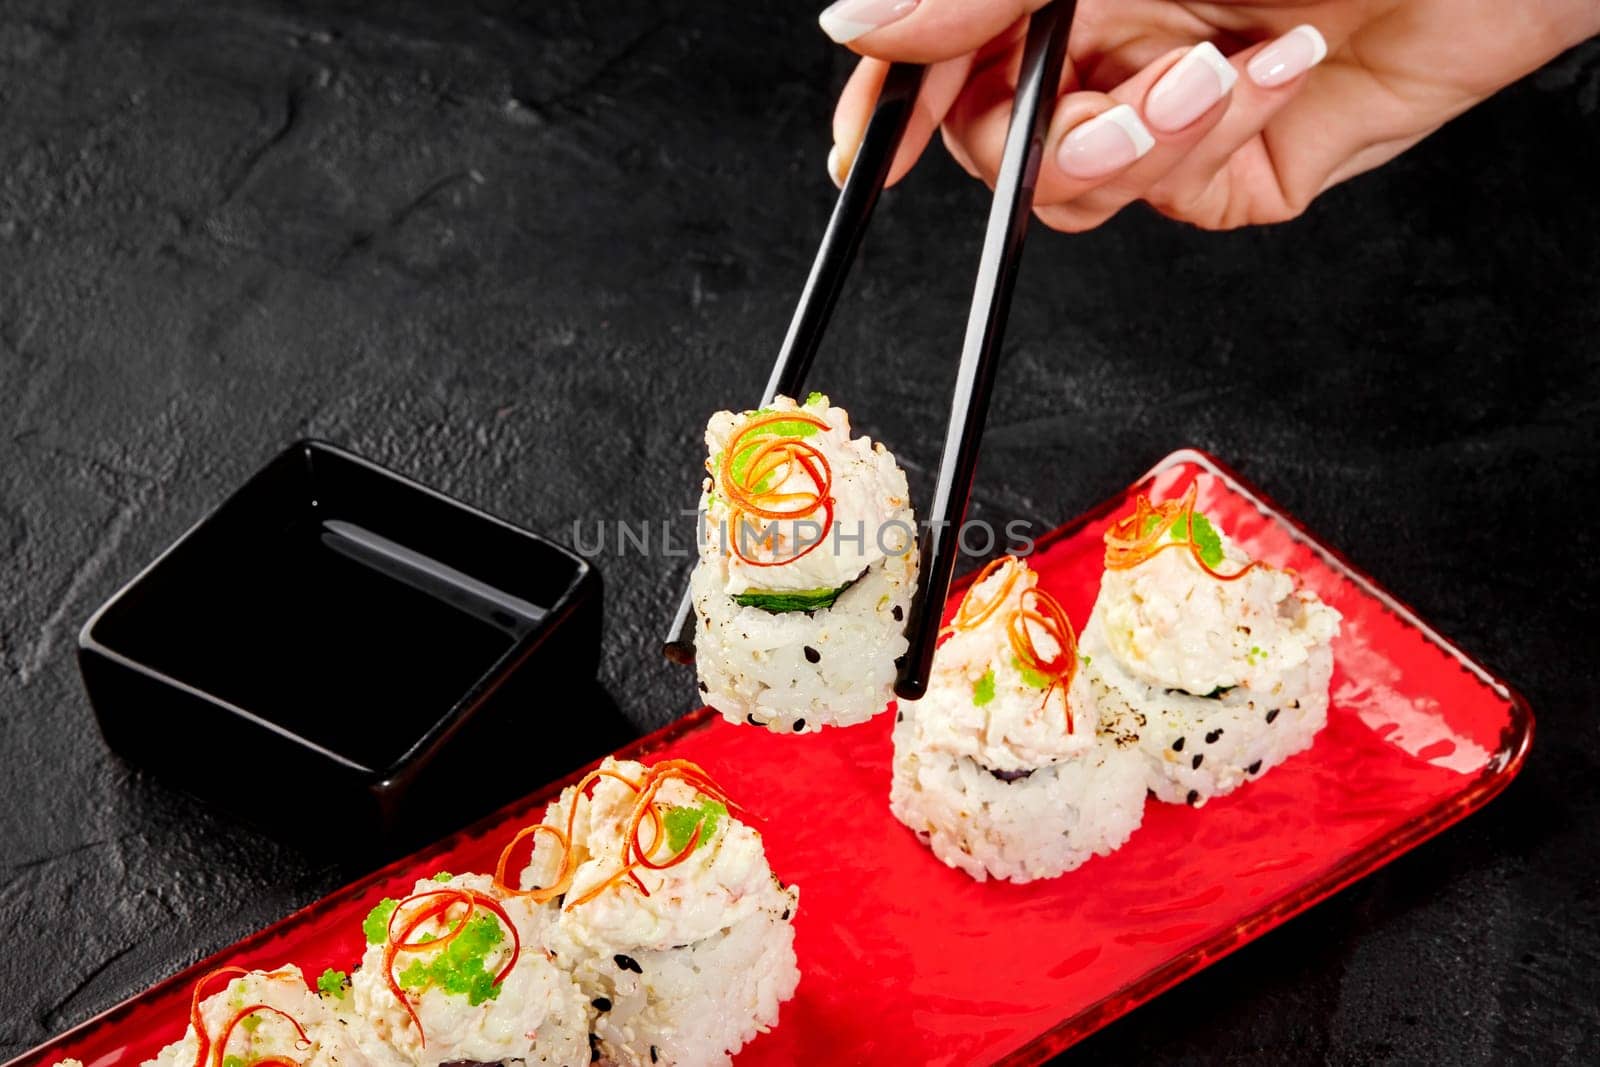 Female hand gracefully holding sushi roll with creamy crab topping with chopsticks over vibrant red serving plate on dark textured background, ready to dip in soy sauce and enjoy Japanese style snack